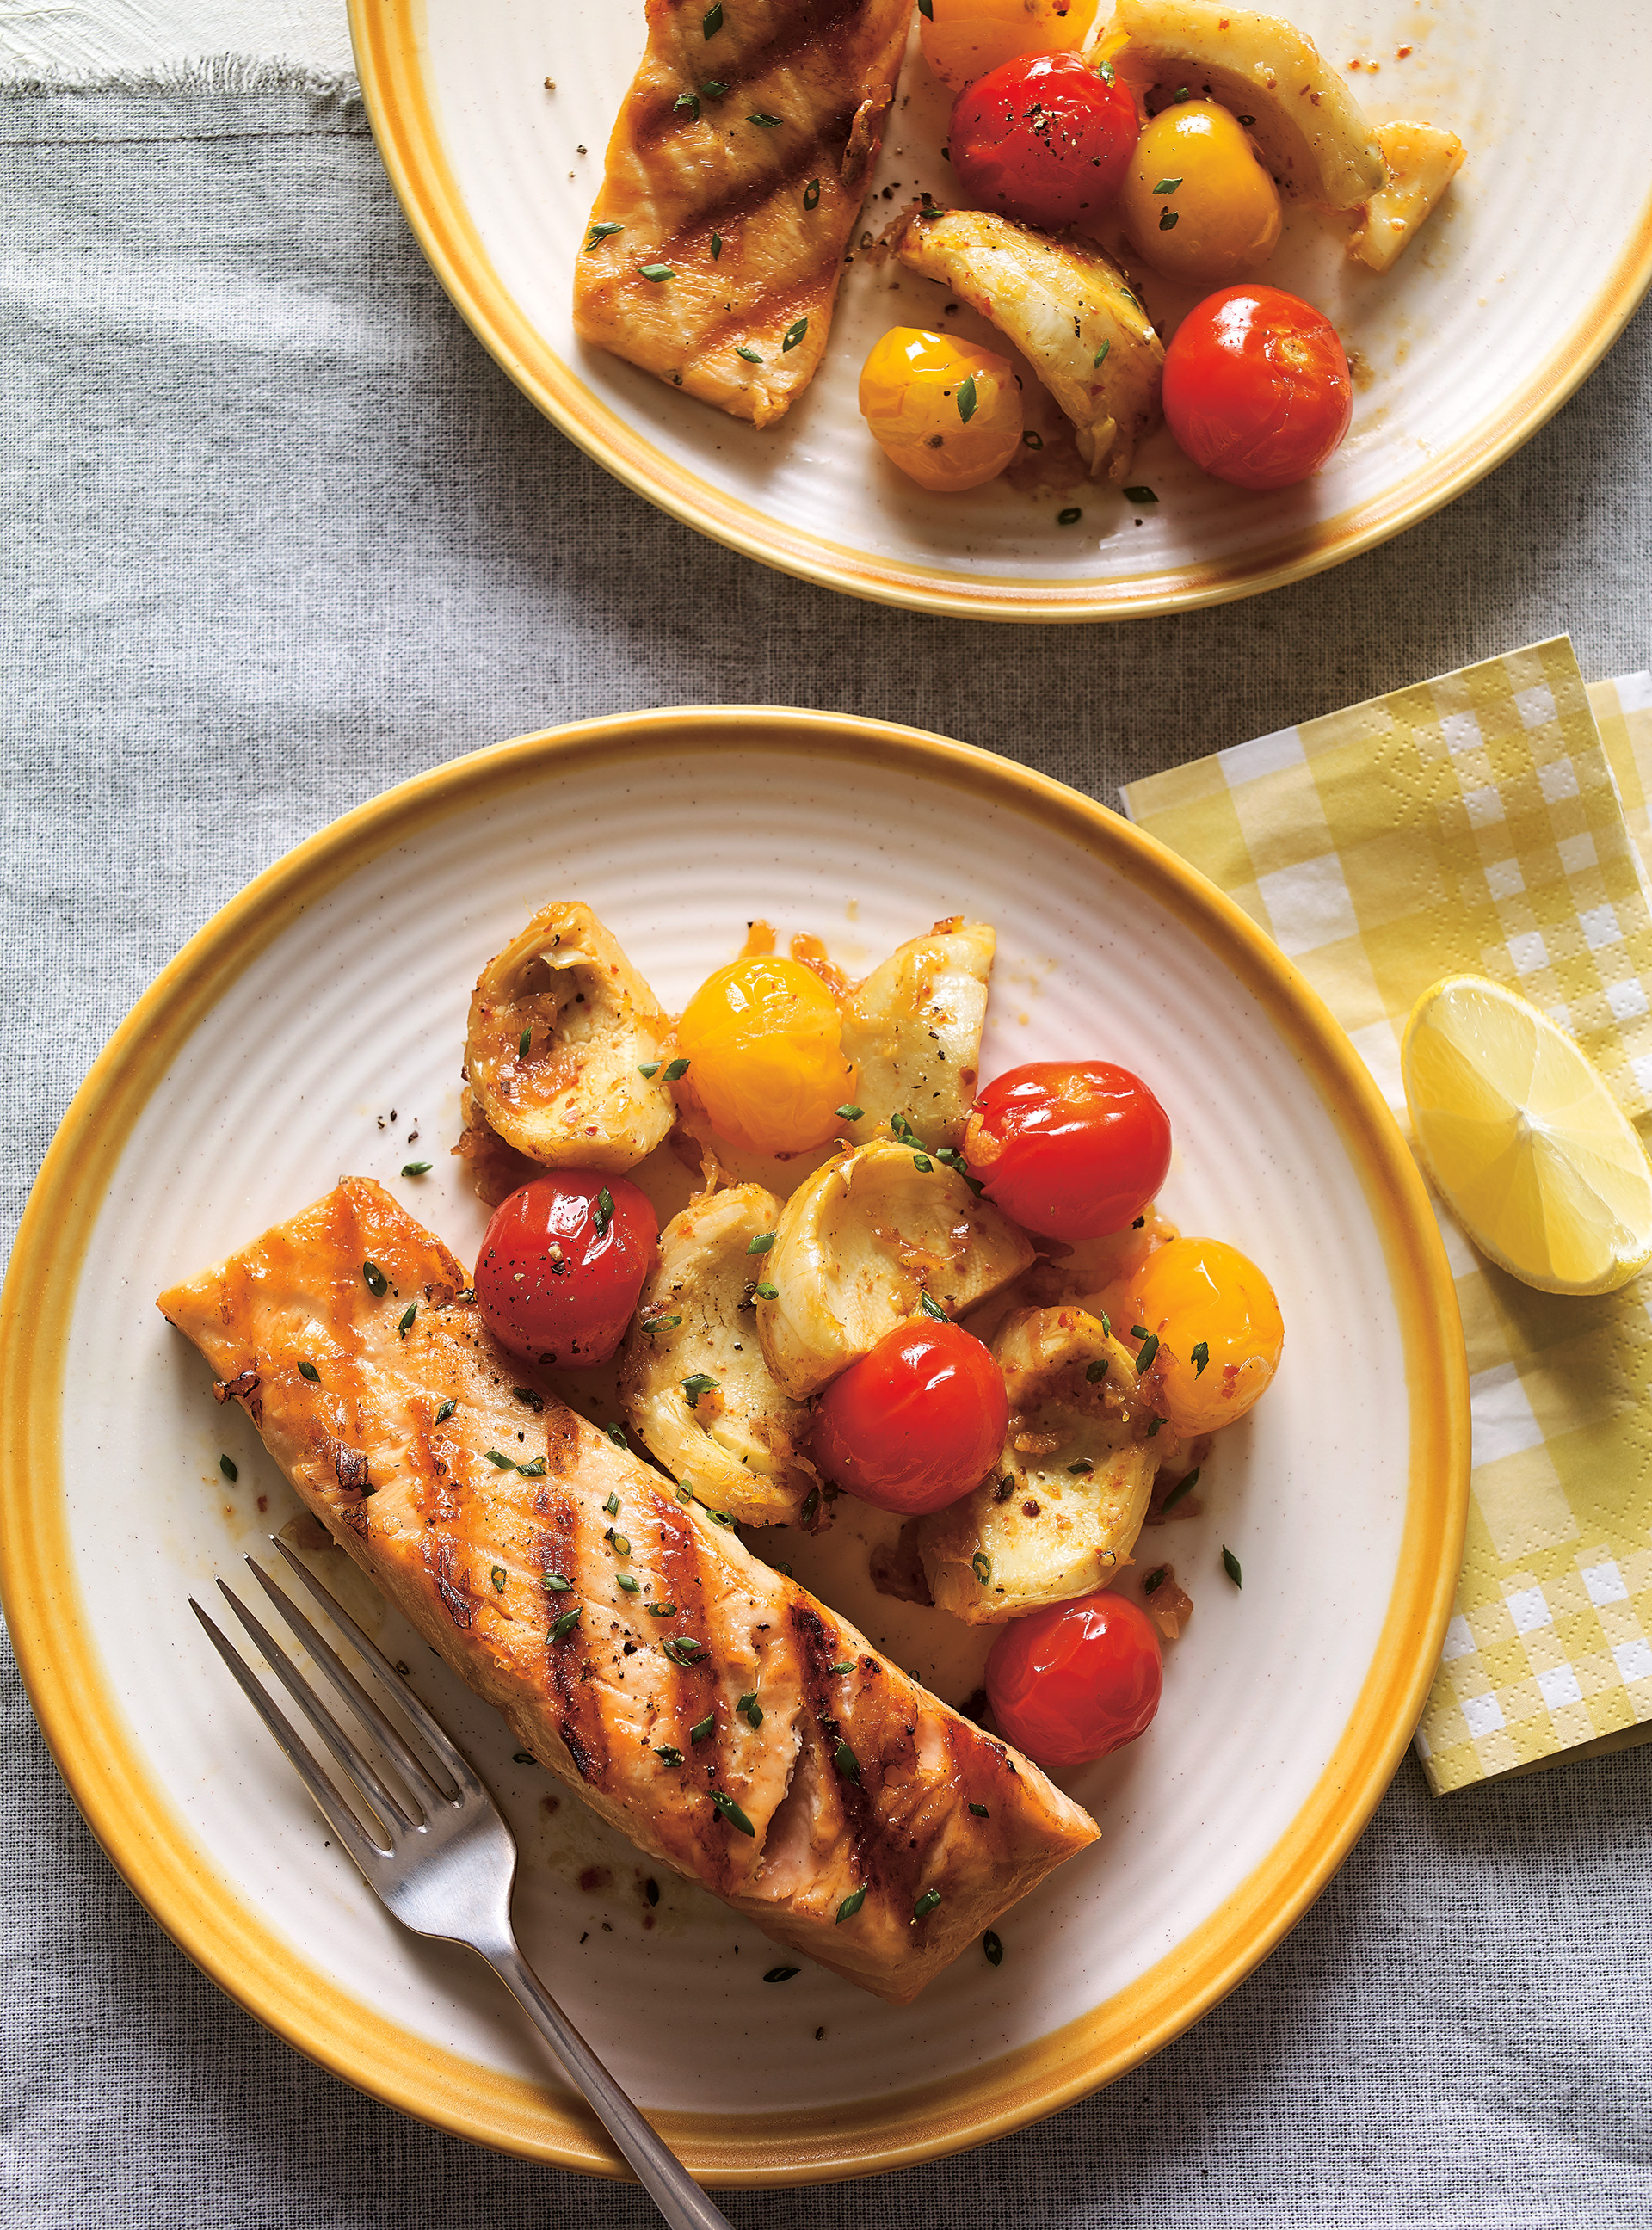 Grilled Salmon with Tomato Confit and Artichokes